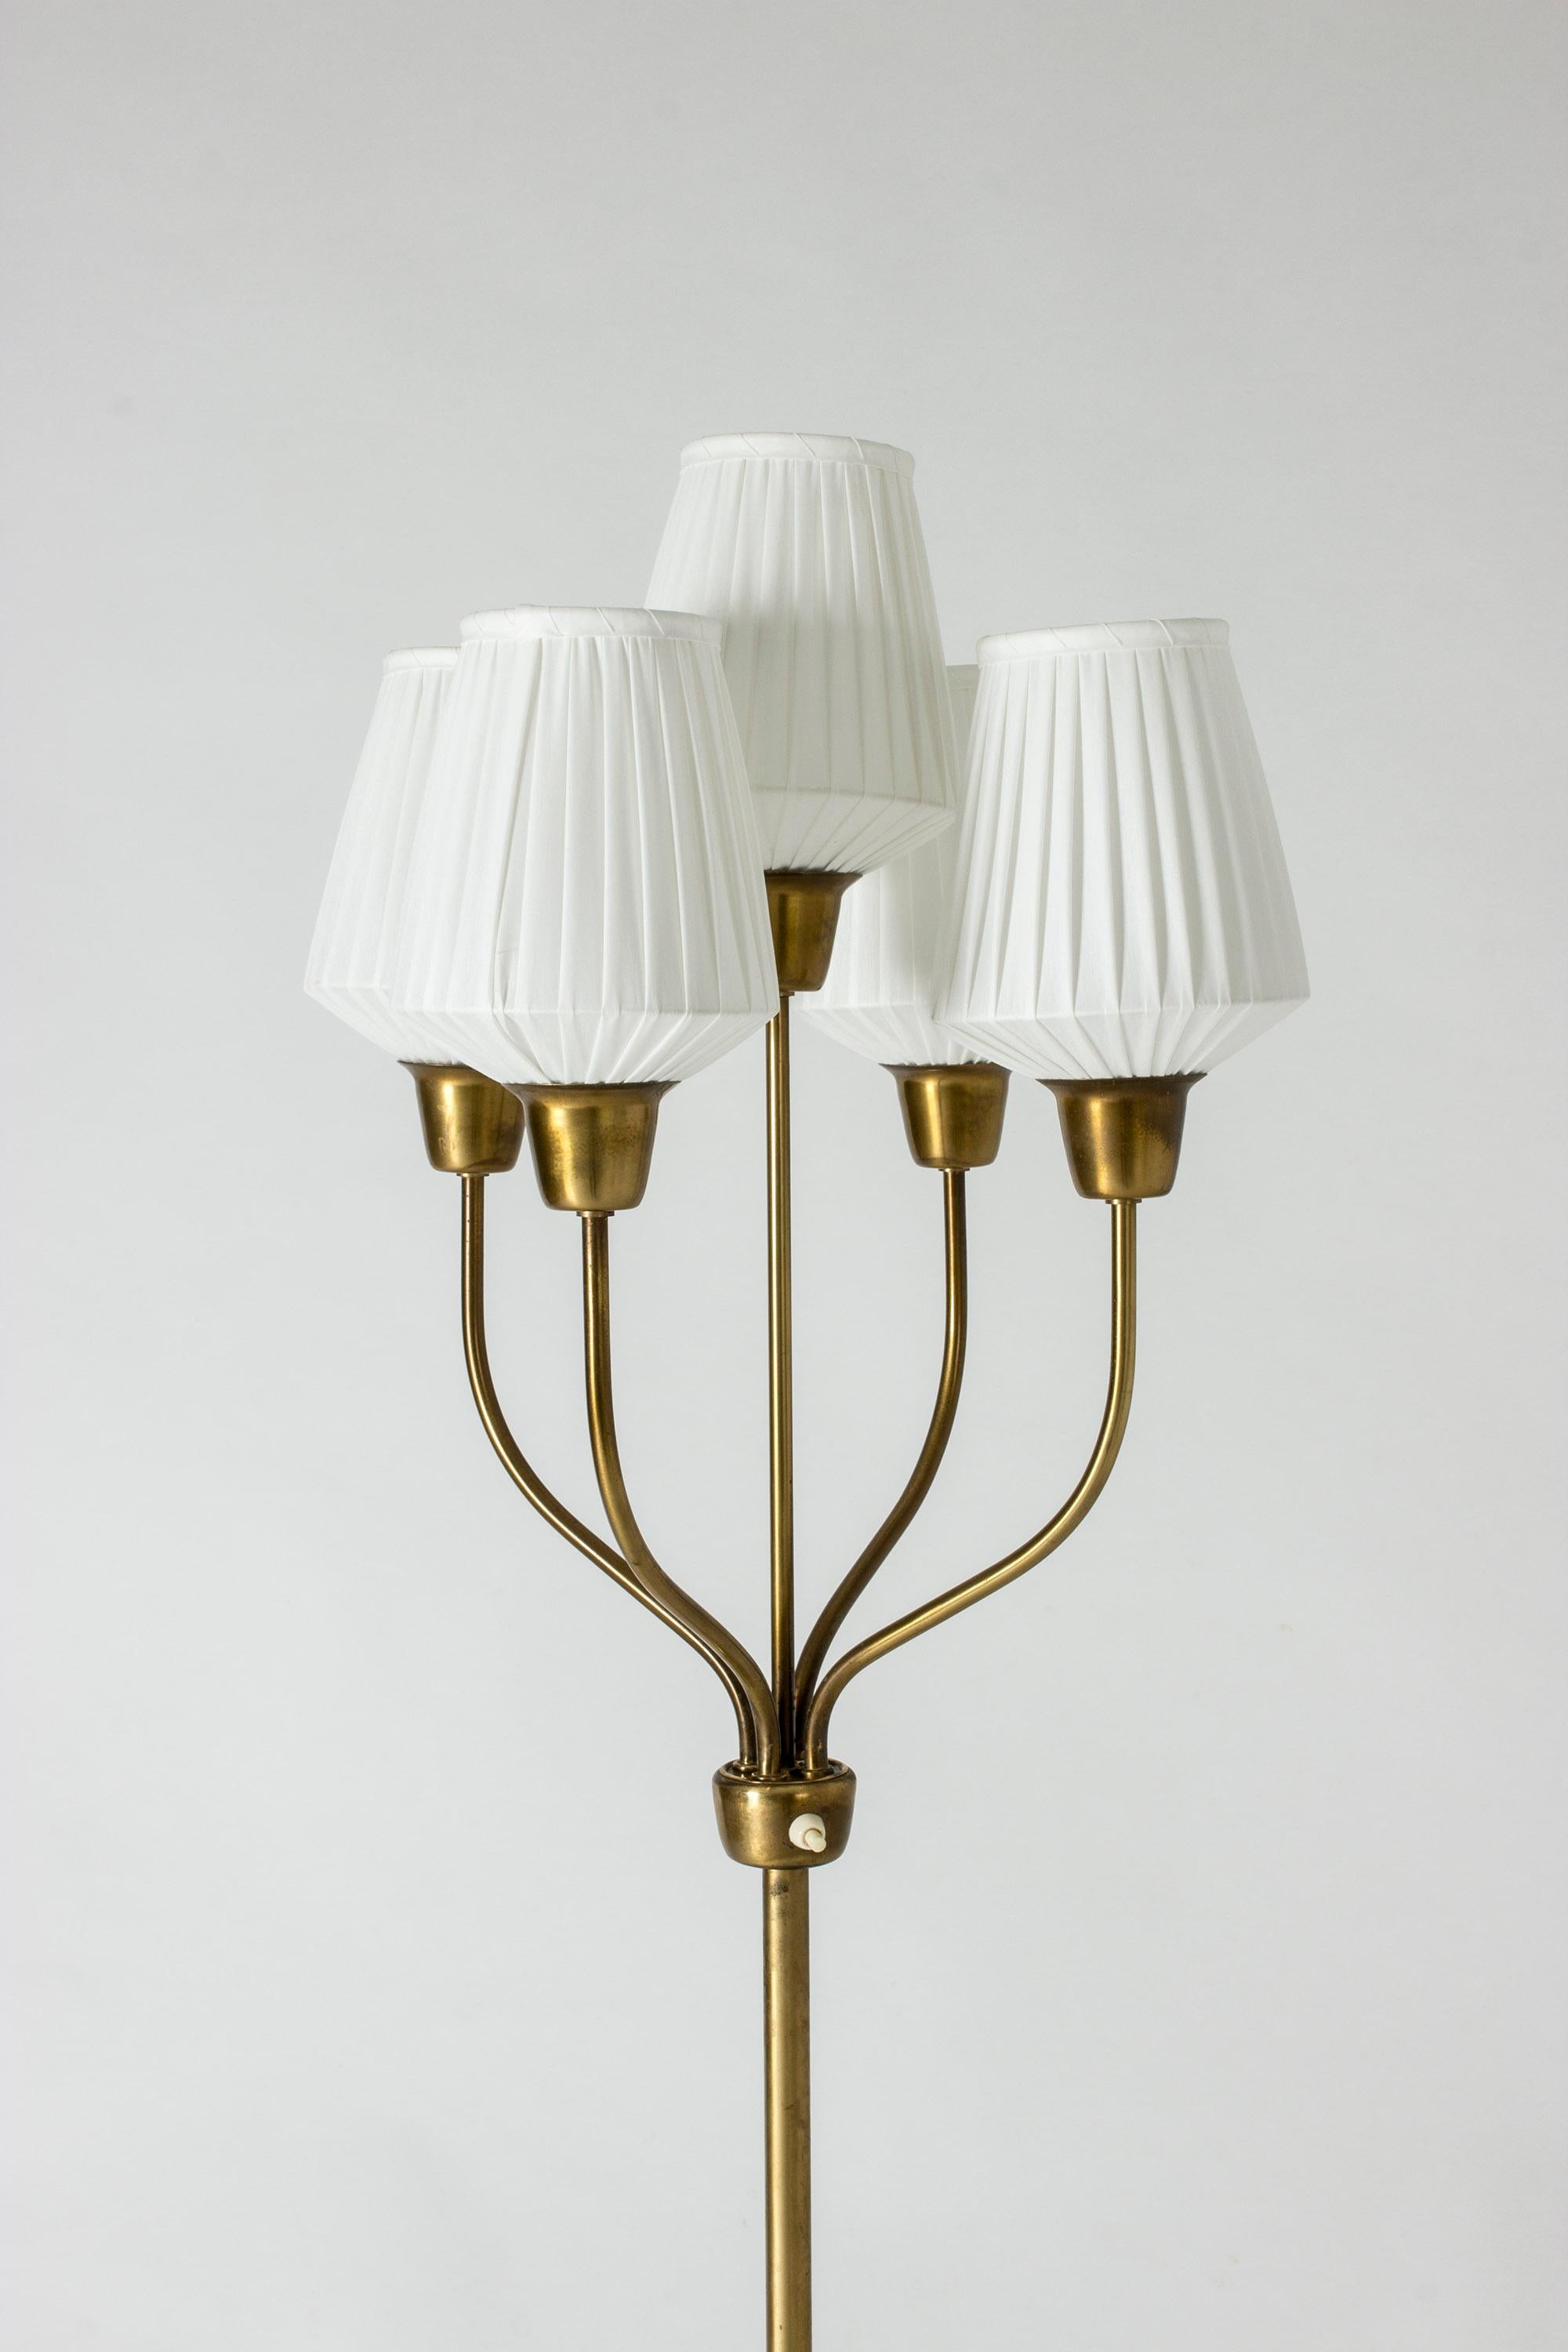 Elegant brass floor lamp by Hans Bergström with five shades on graceful arms.